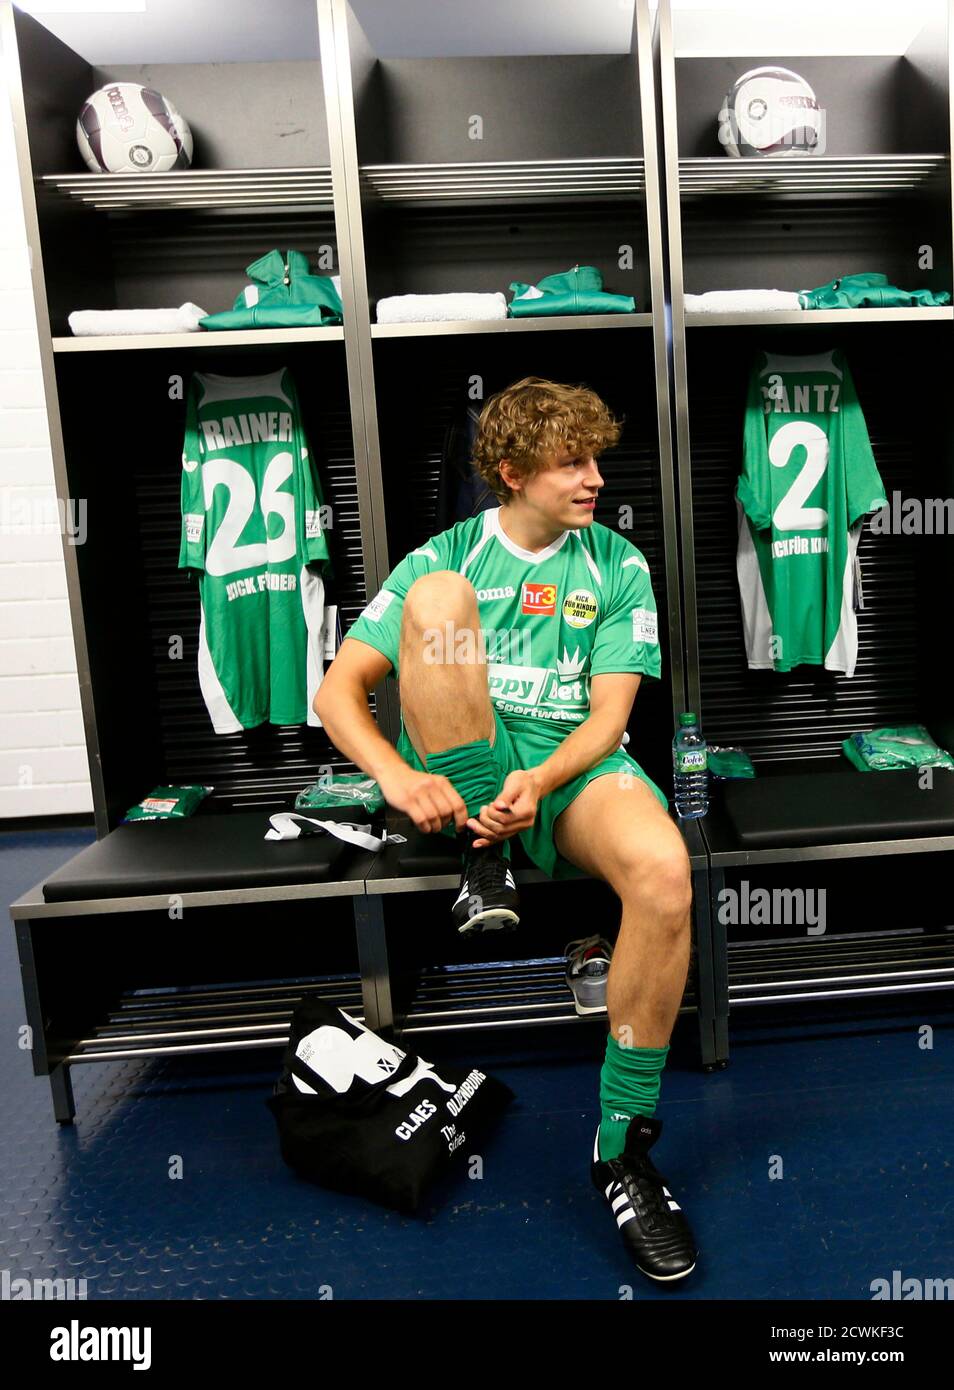 German singer Tim Bendzko gets ready in the dressing room prior to the charity soccer "Kick for Kids", with Germany's Red Bull Formula One World Champion Vettel and compatriot